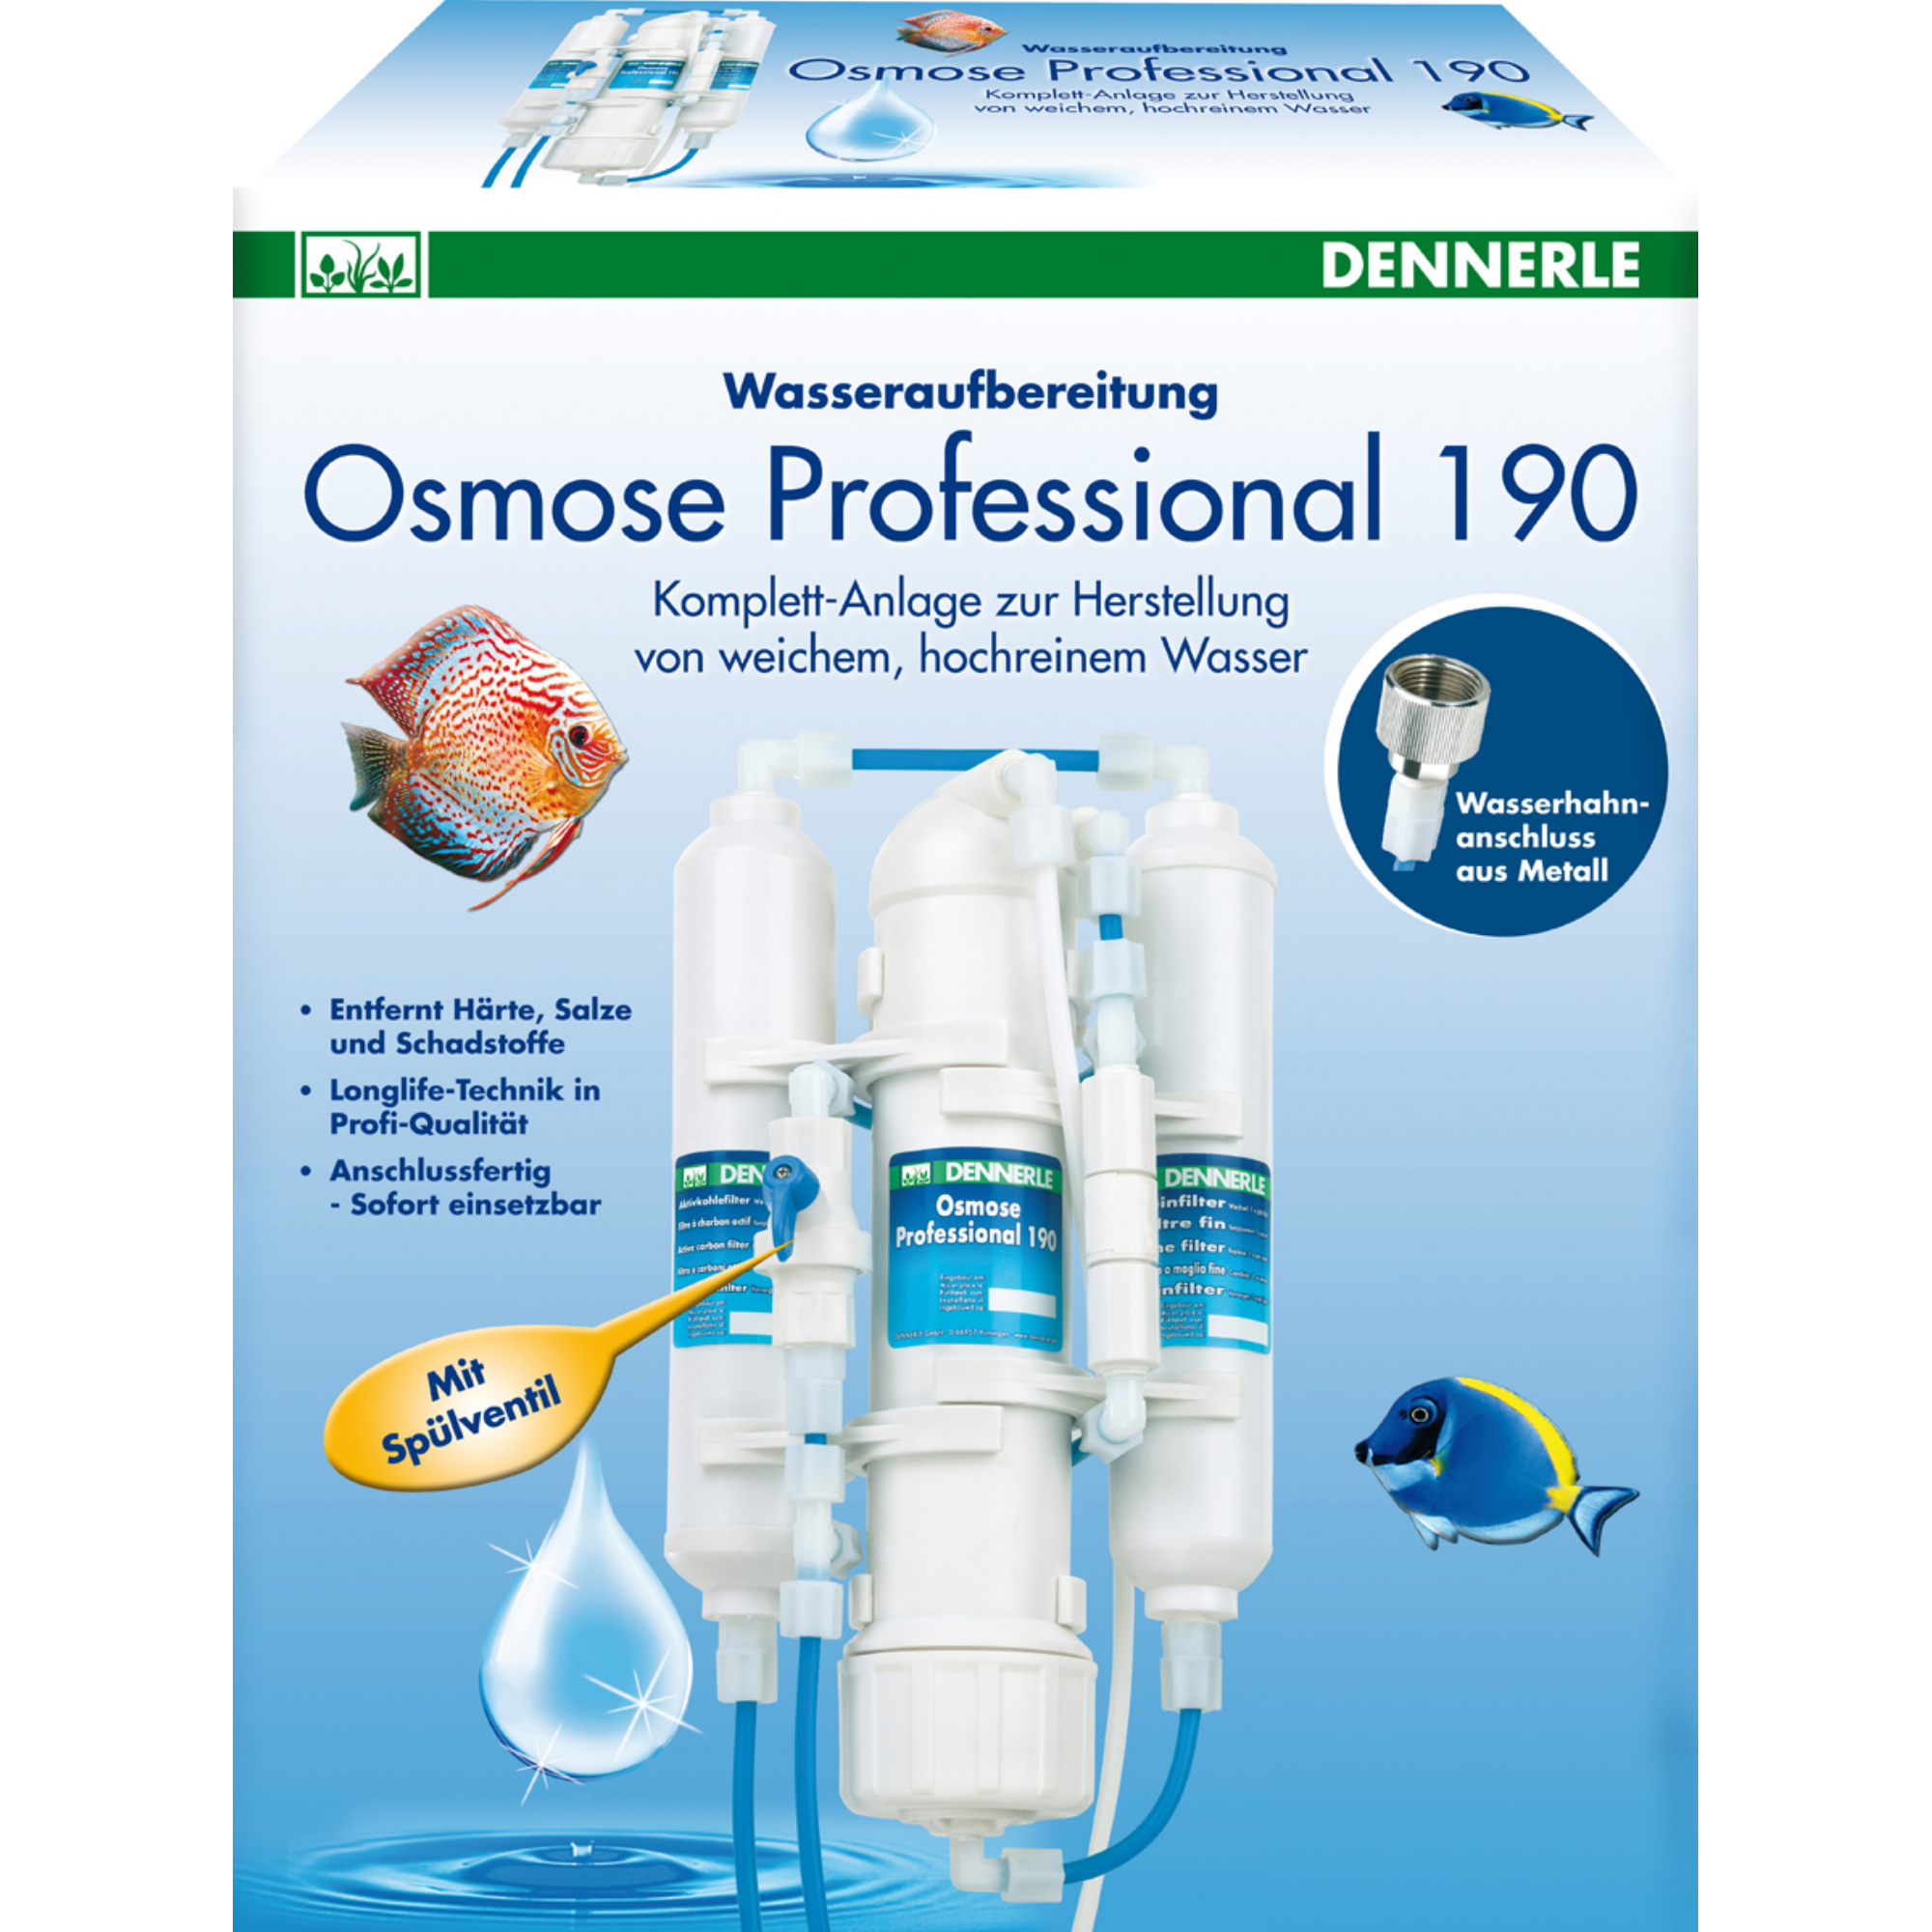 Osmose Professional 190 Dennerle + product picture